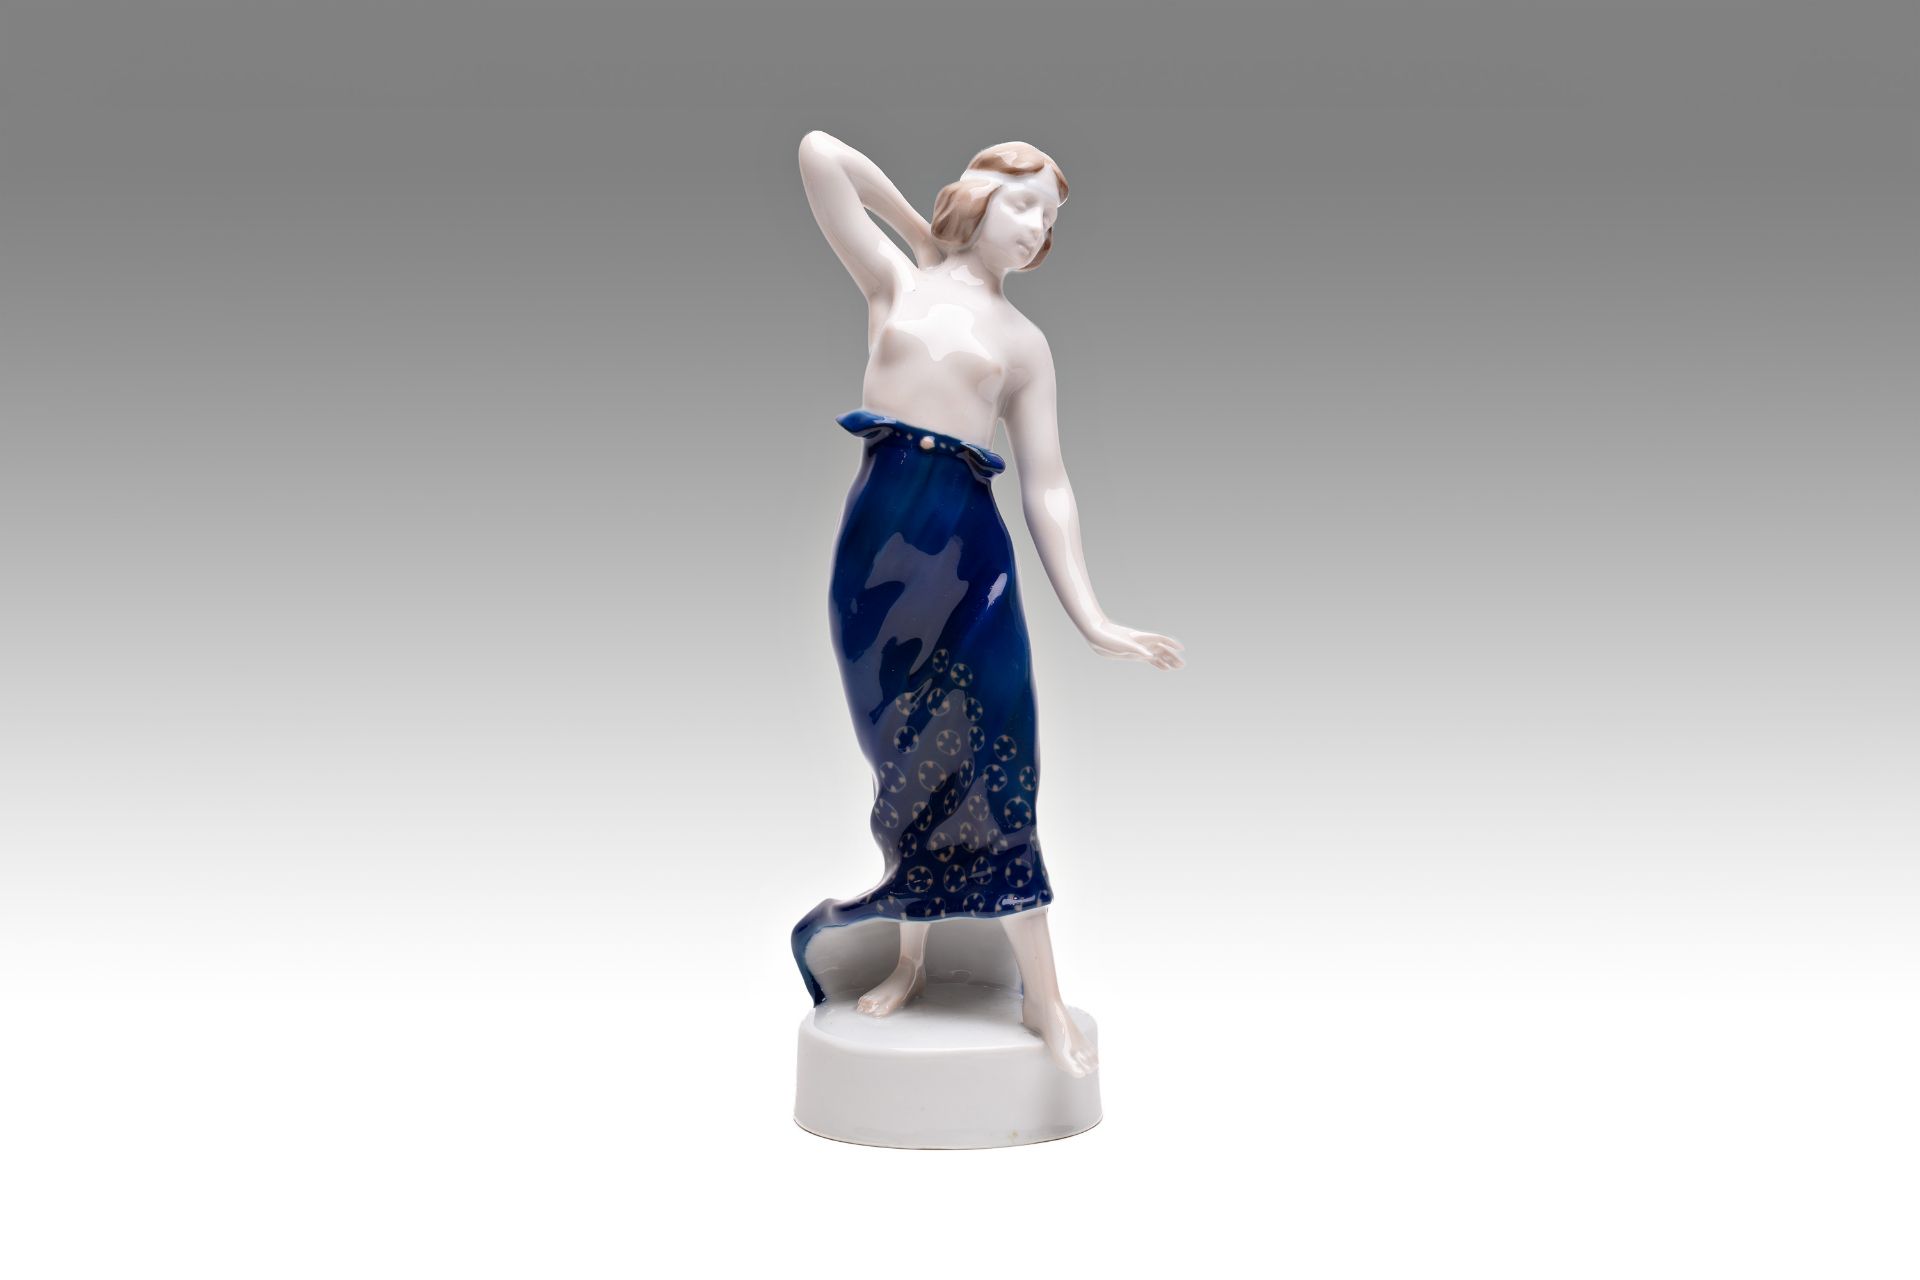 IONIAN DANCER "IONISCHE TANZERIN" | Rosenthal, designed by Berthold Boehs (Germany)